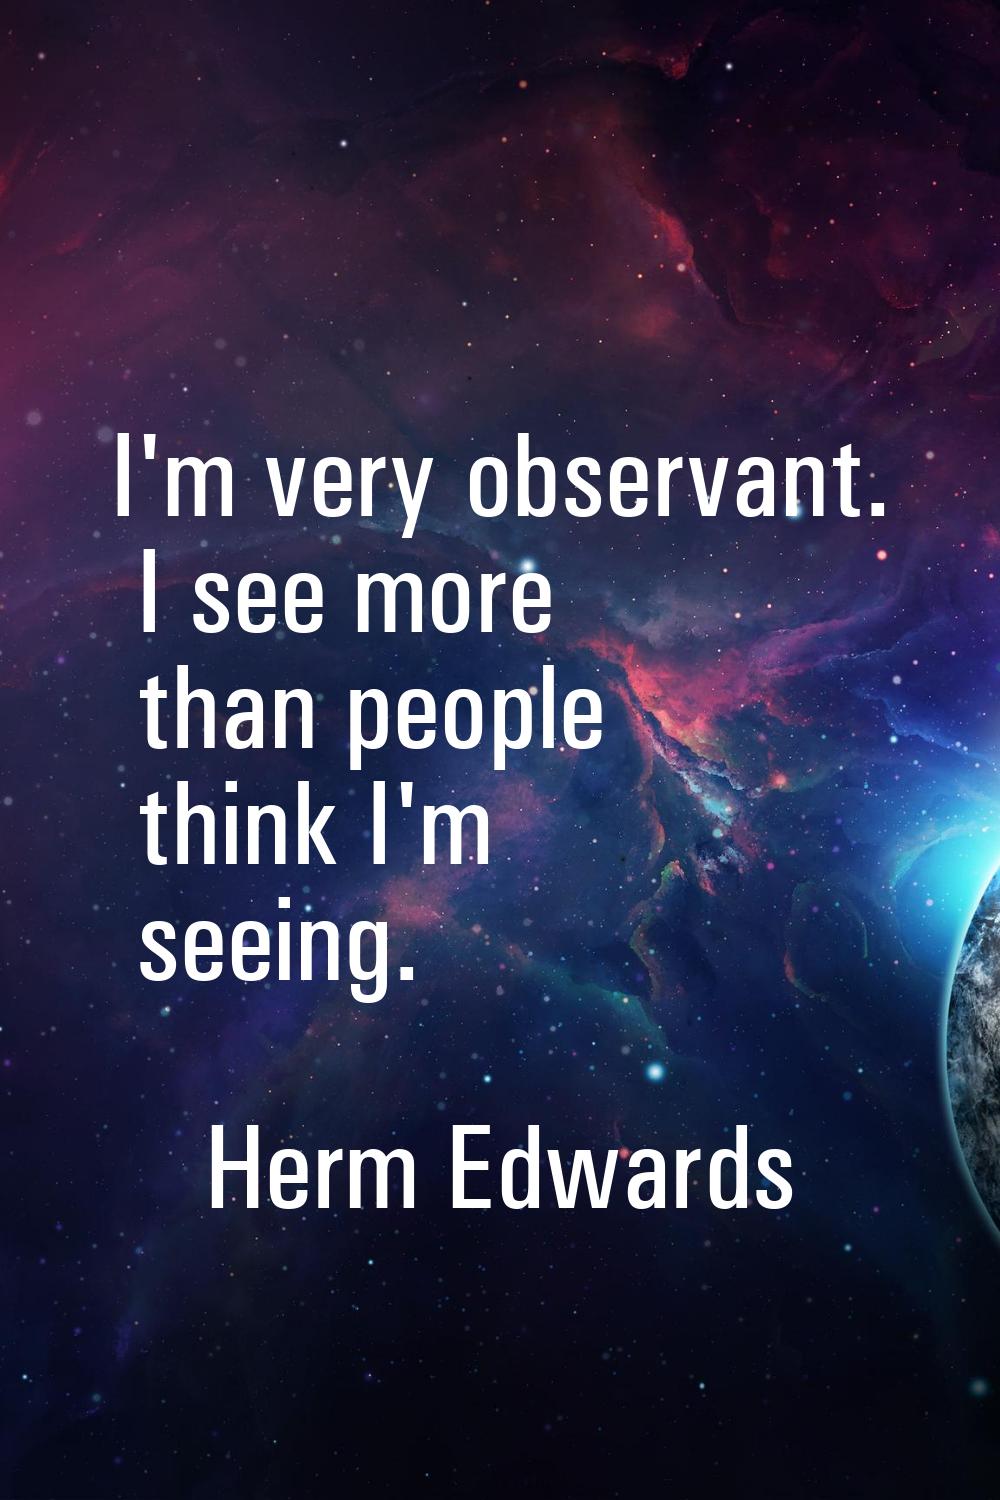 I'm very observant. I see more than people think I'm seeing.